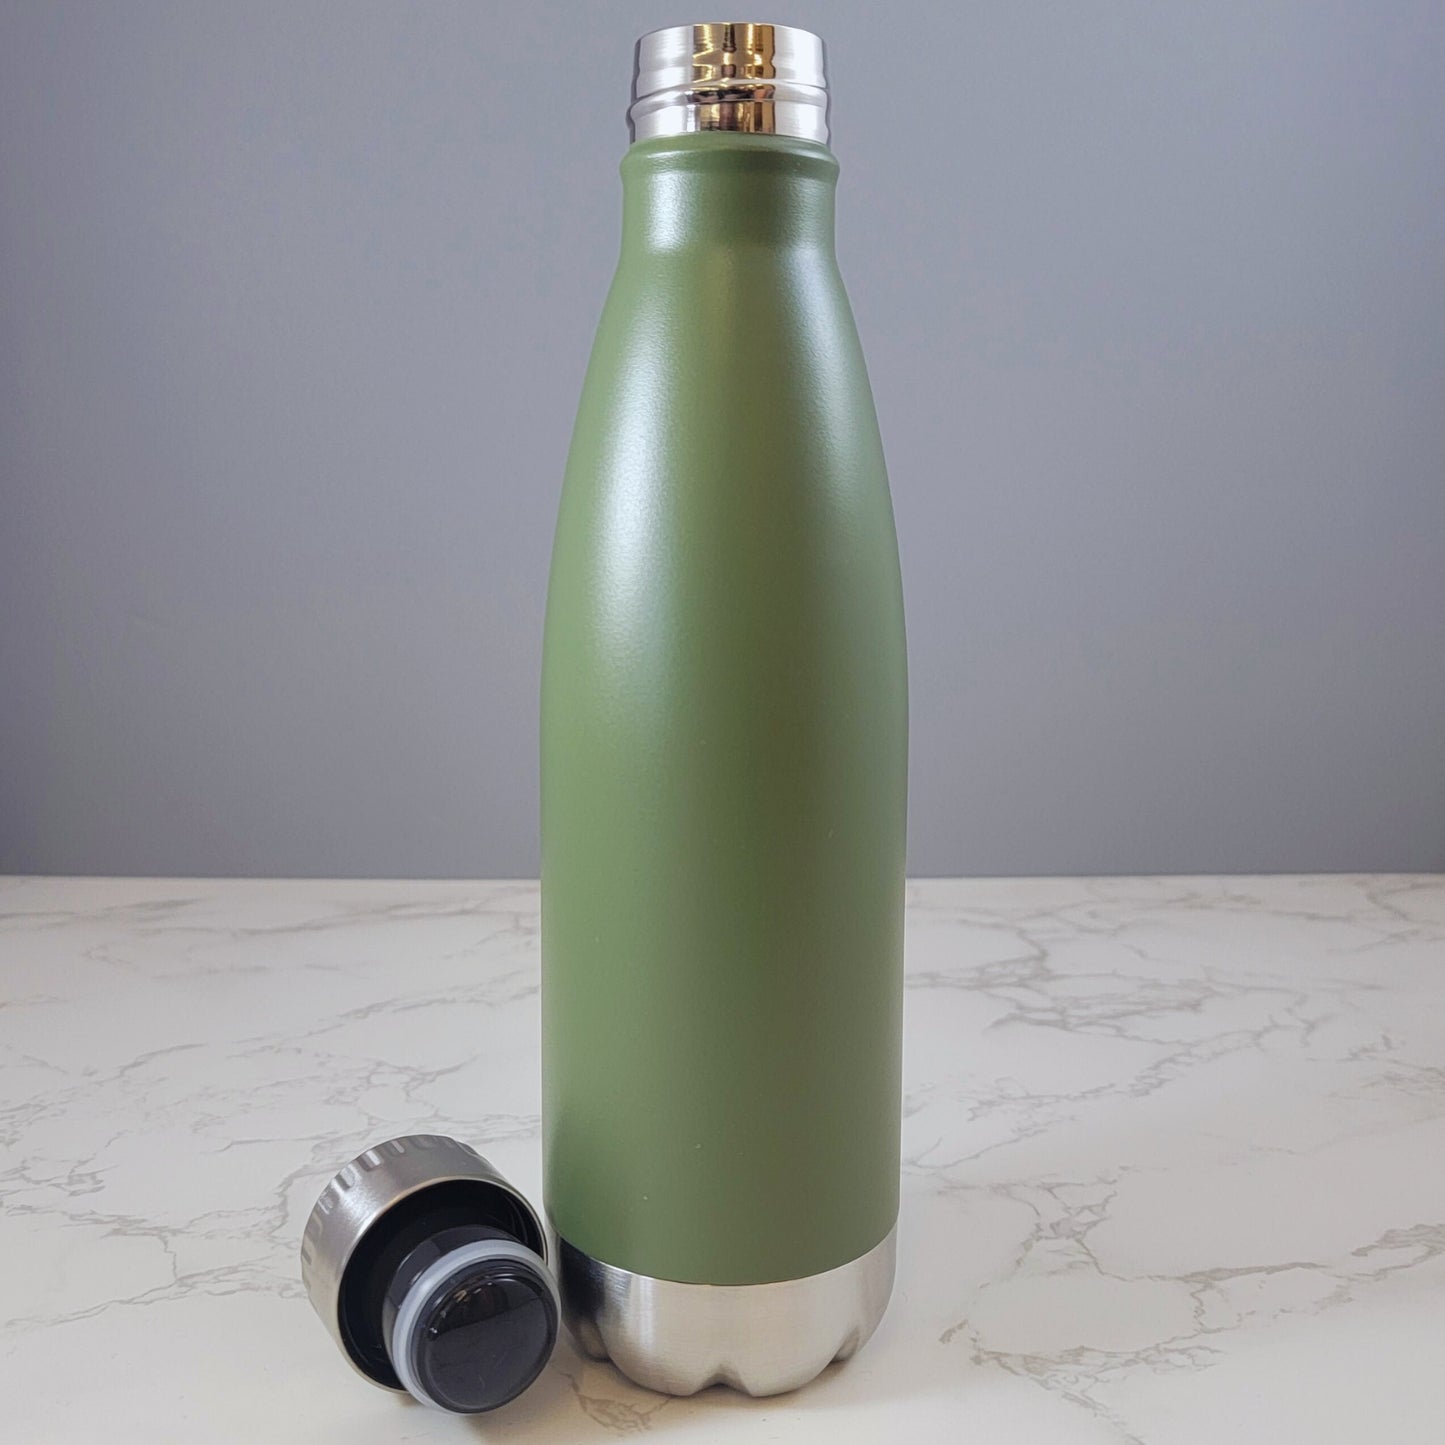 Camping Hair Dont Care Green 17oz Water Bottle LA5113